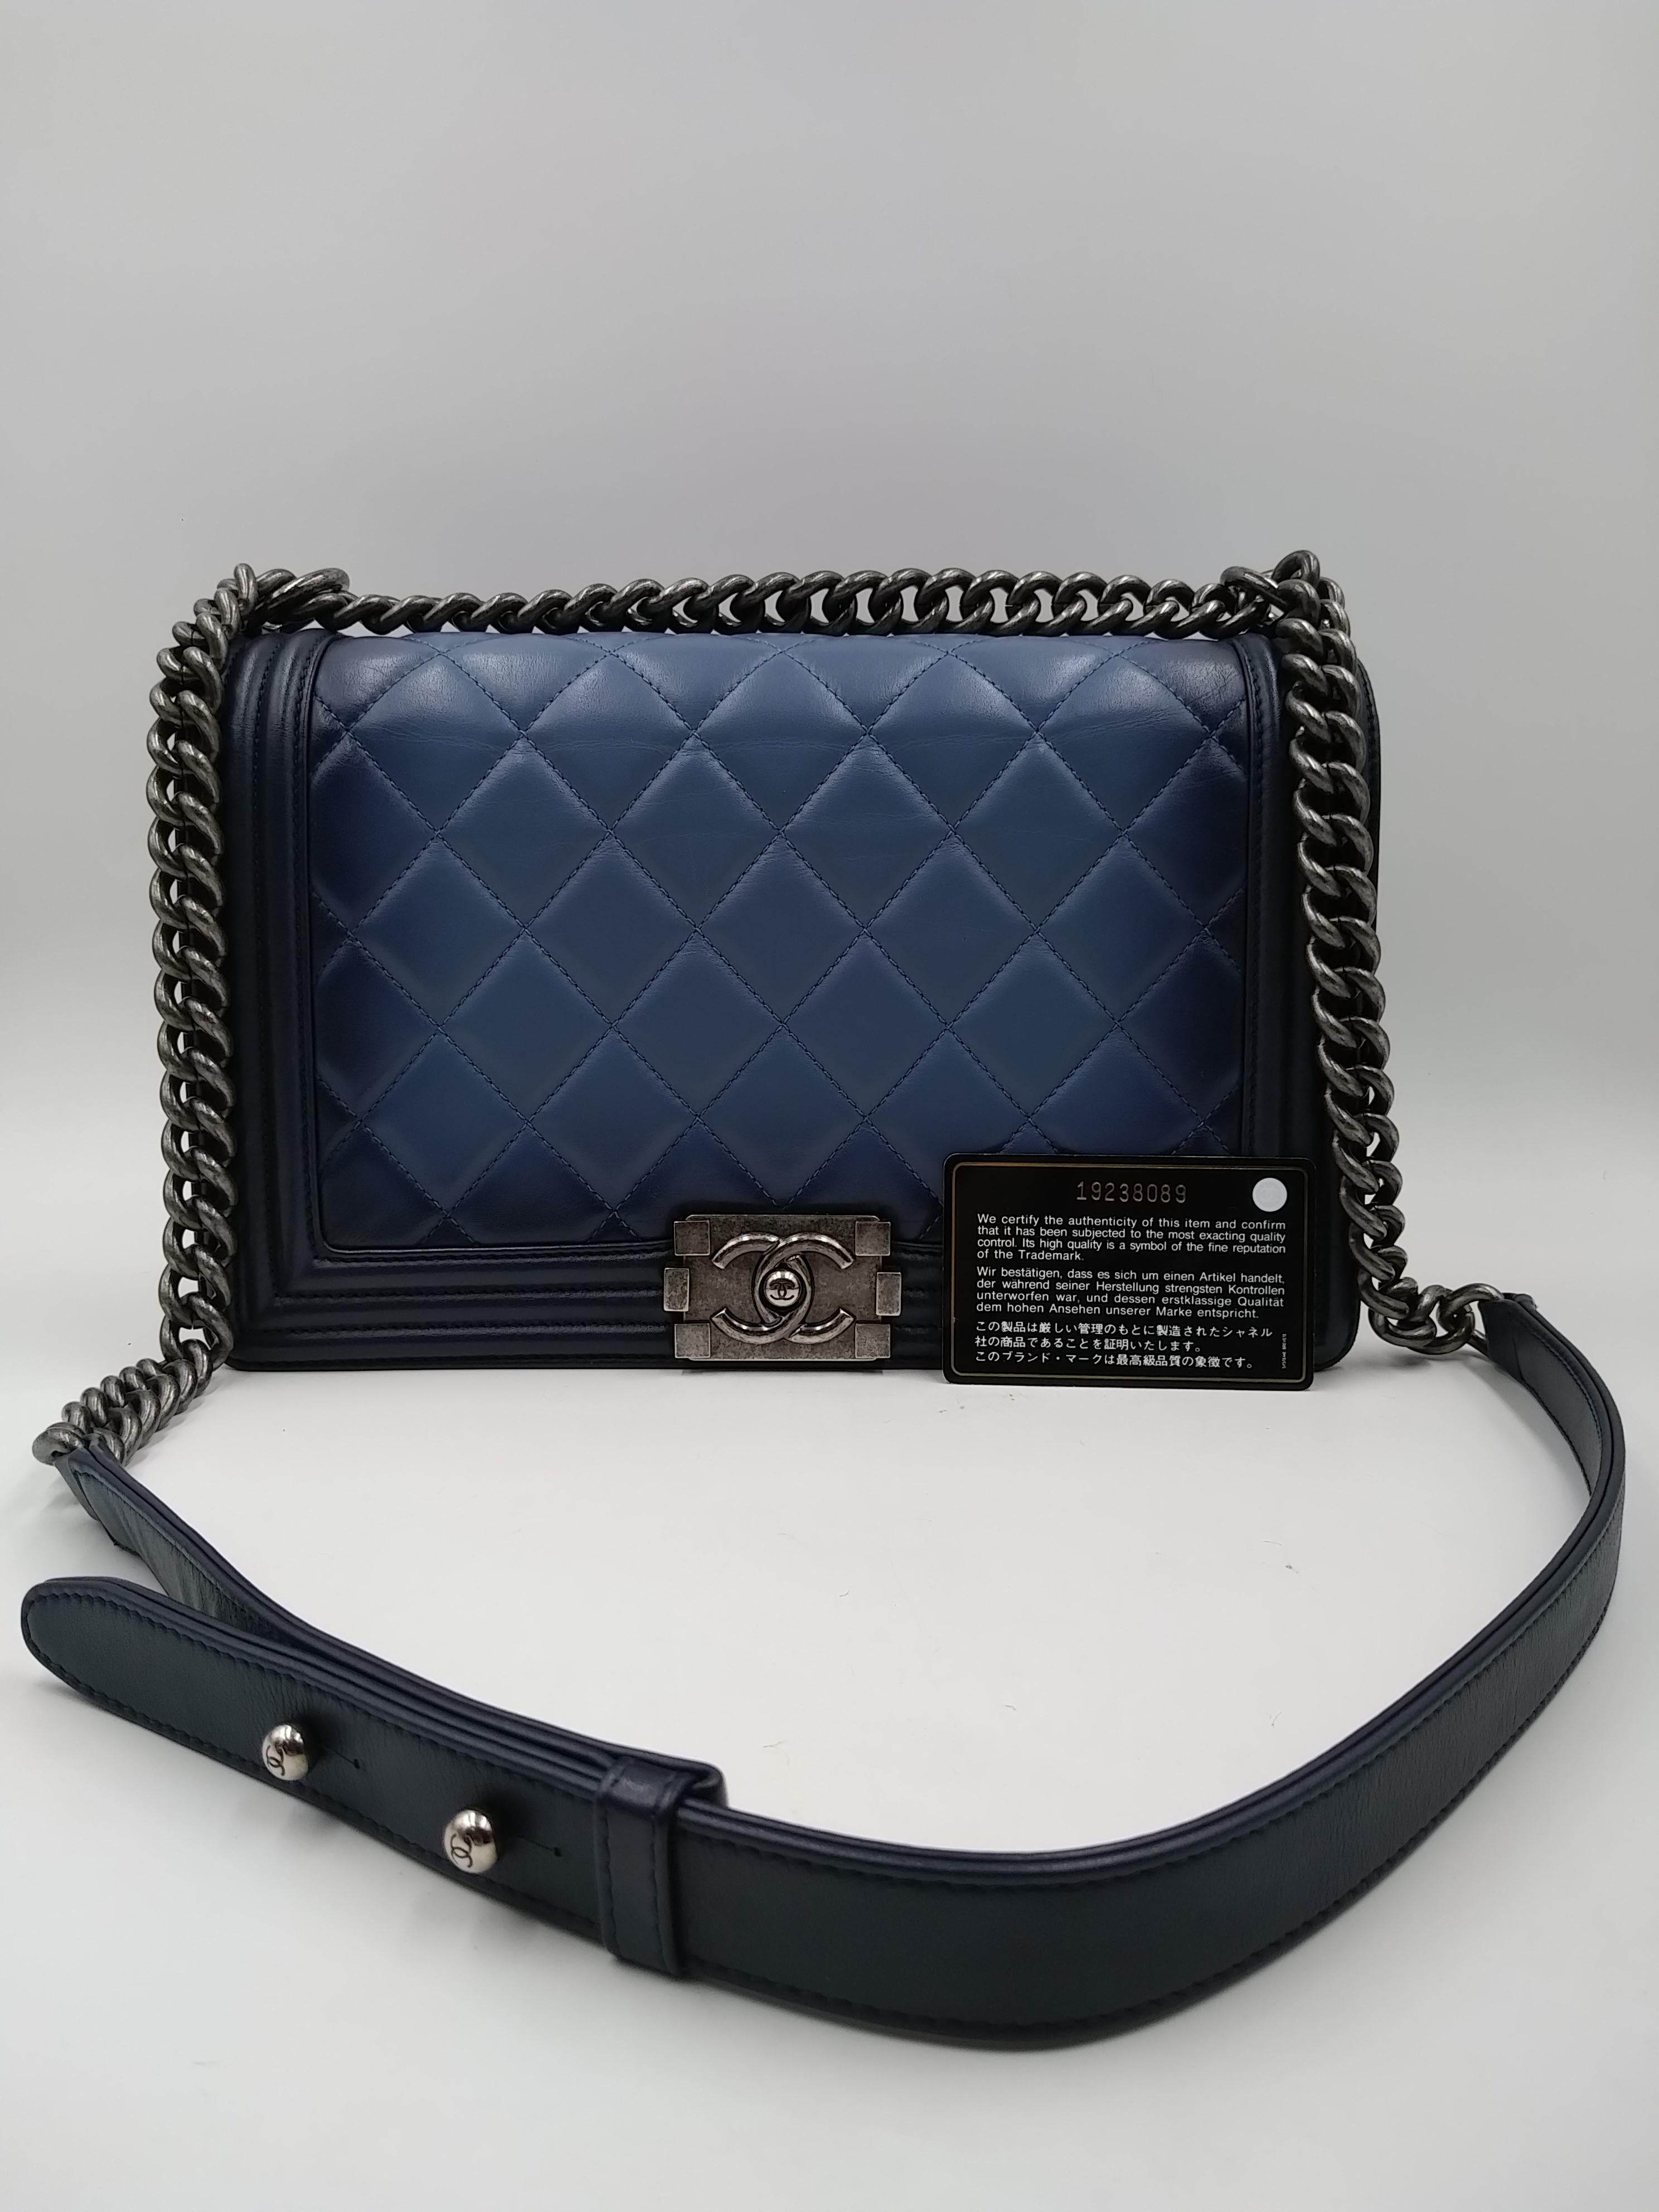 Chanel Blue Ombré Quilted Leather Boy Bag 4